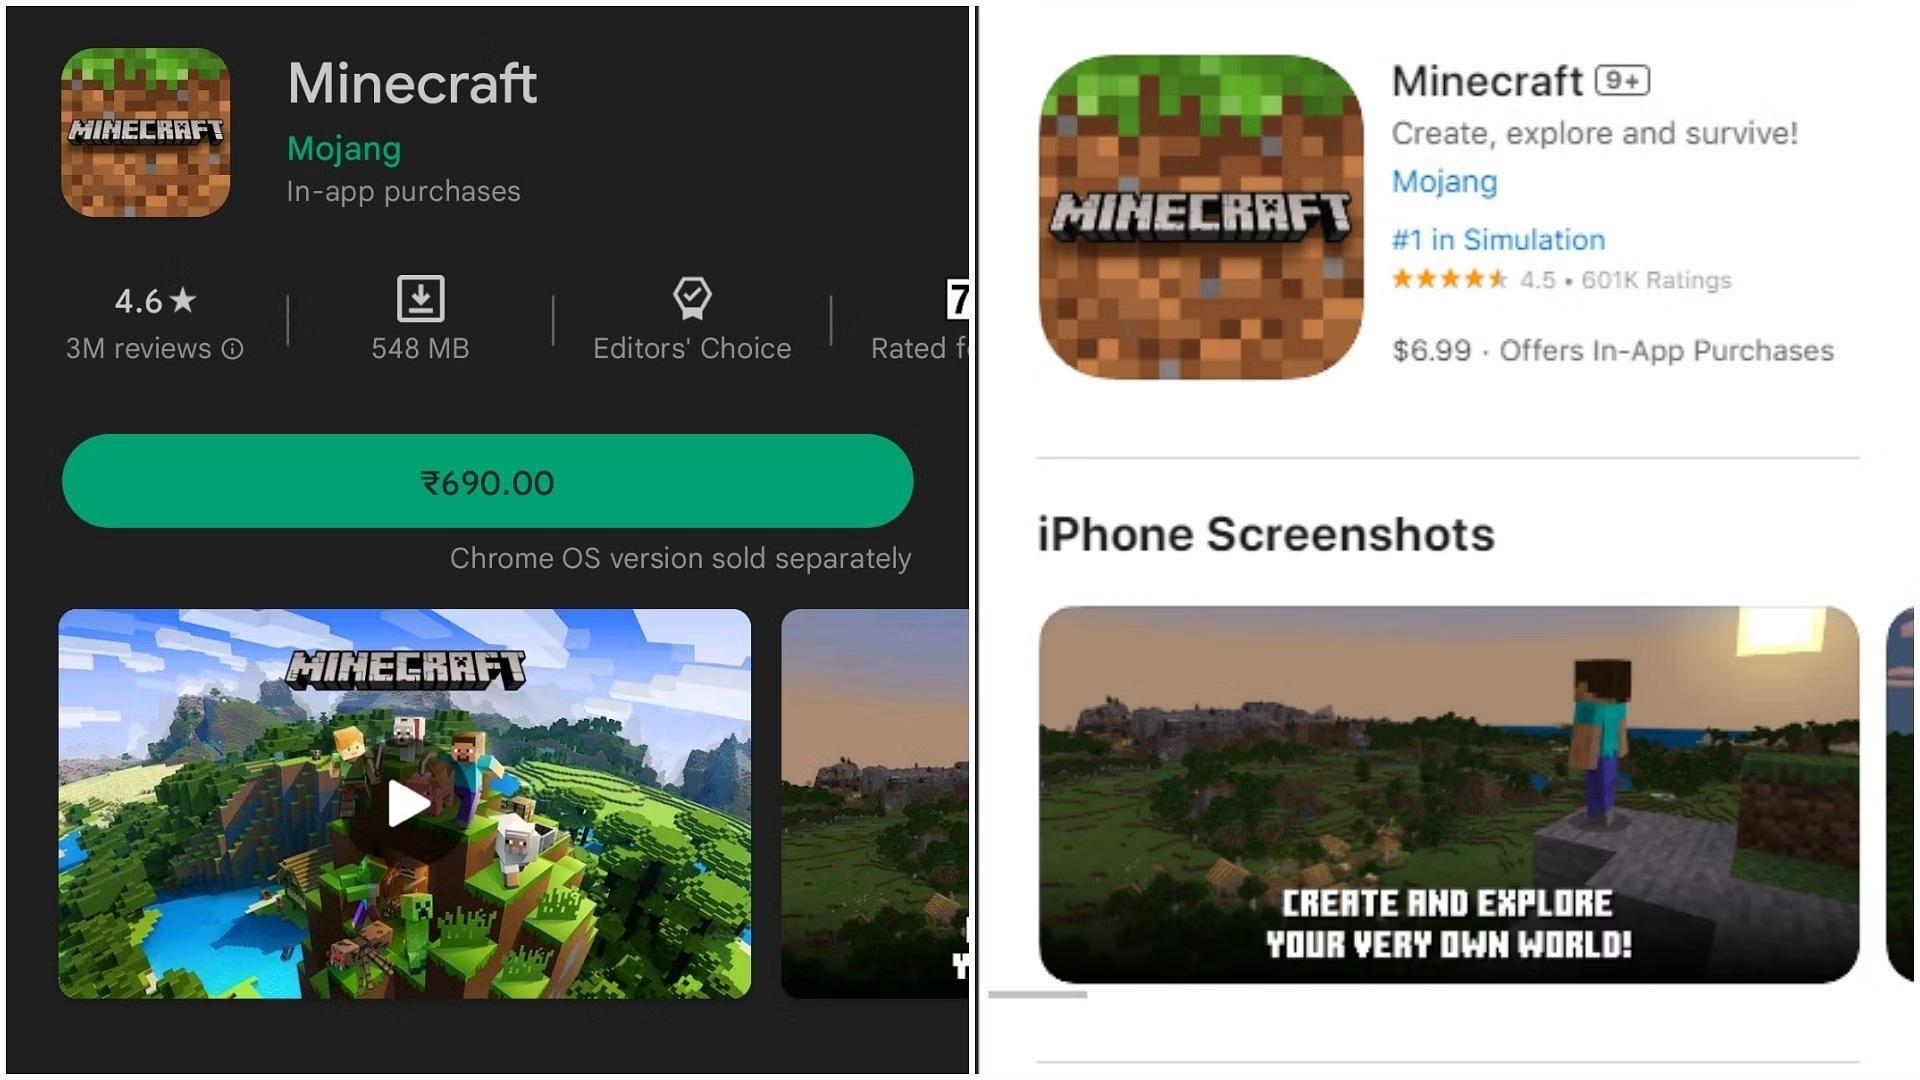 How to Play Minecraft for Free on Mobile? - The SportsRush